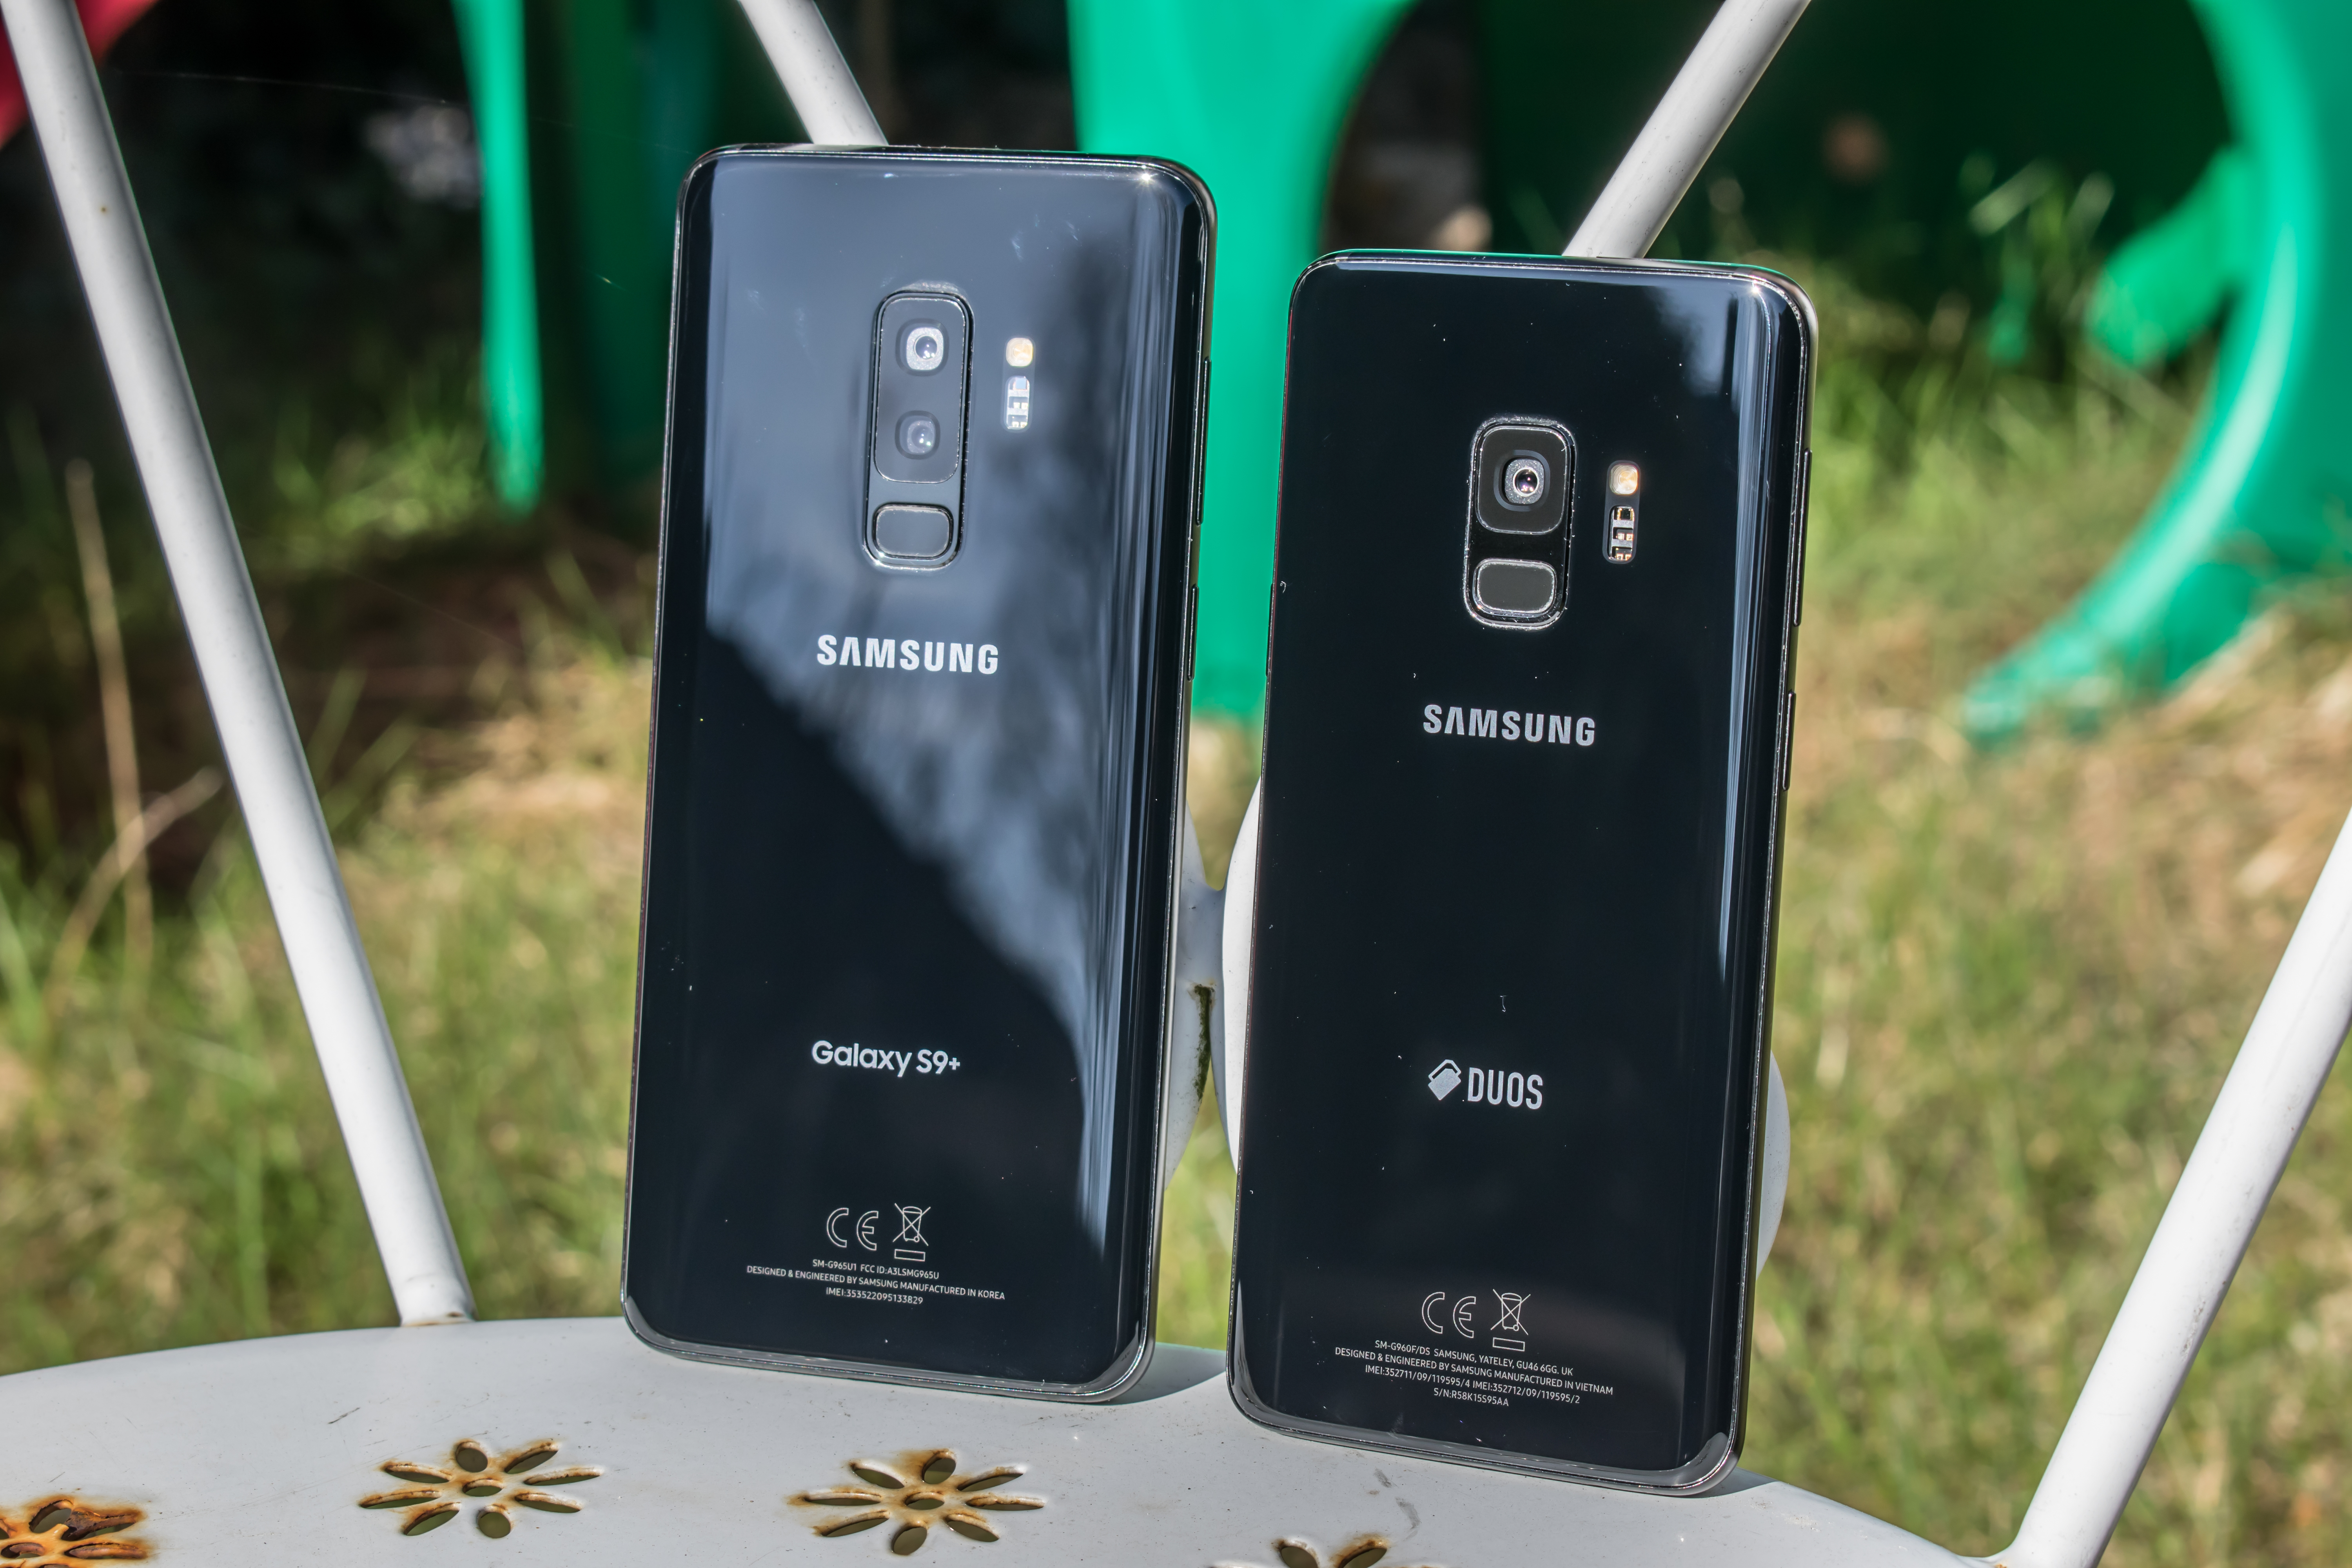 The Samsung Galaxy S9 And S9 Review Exynos And Snapdragon At 960fps